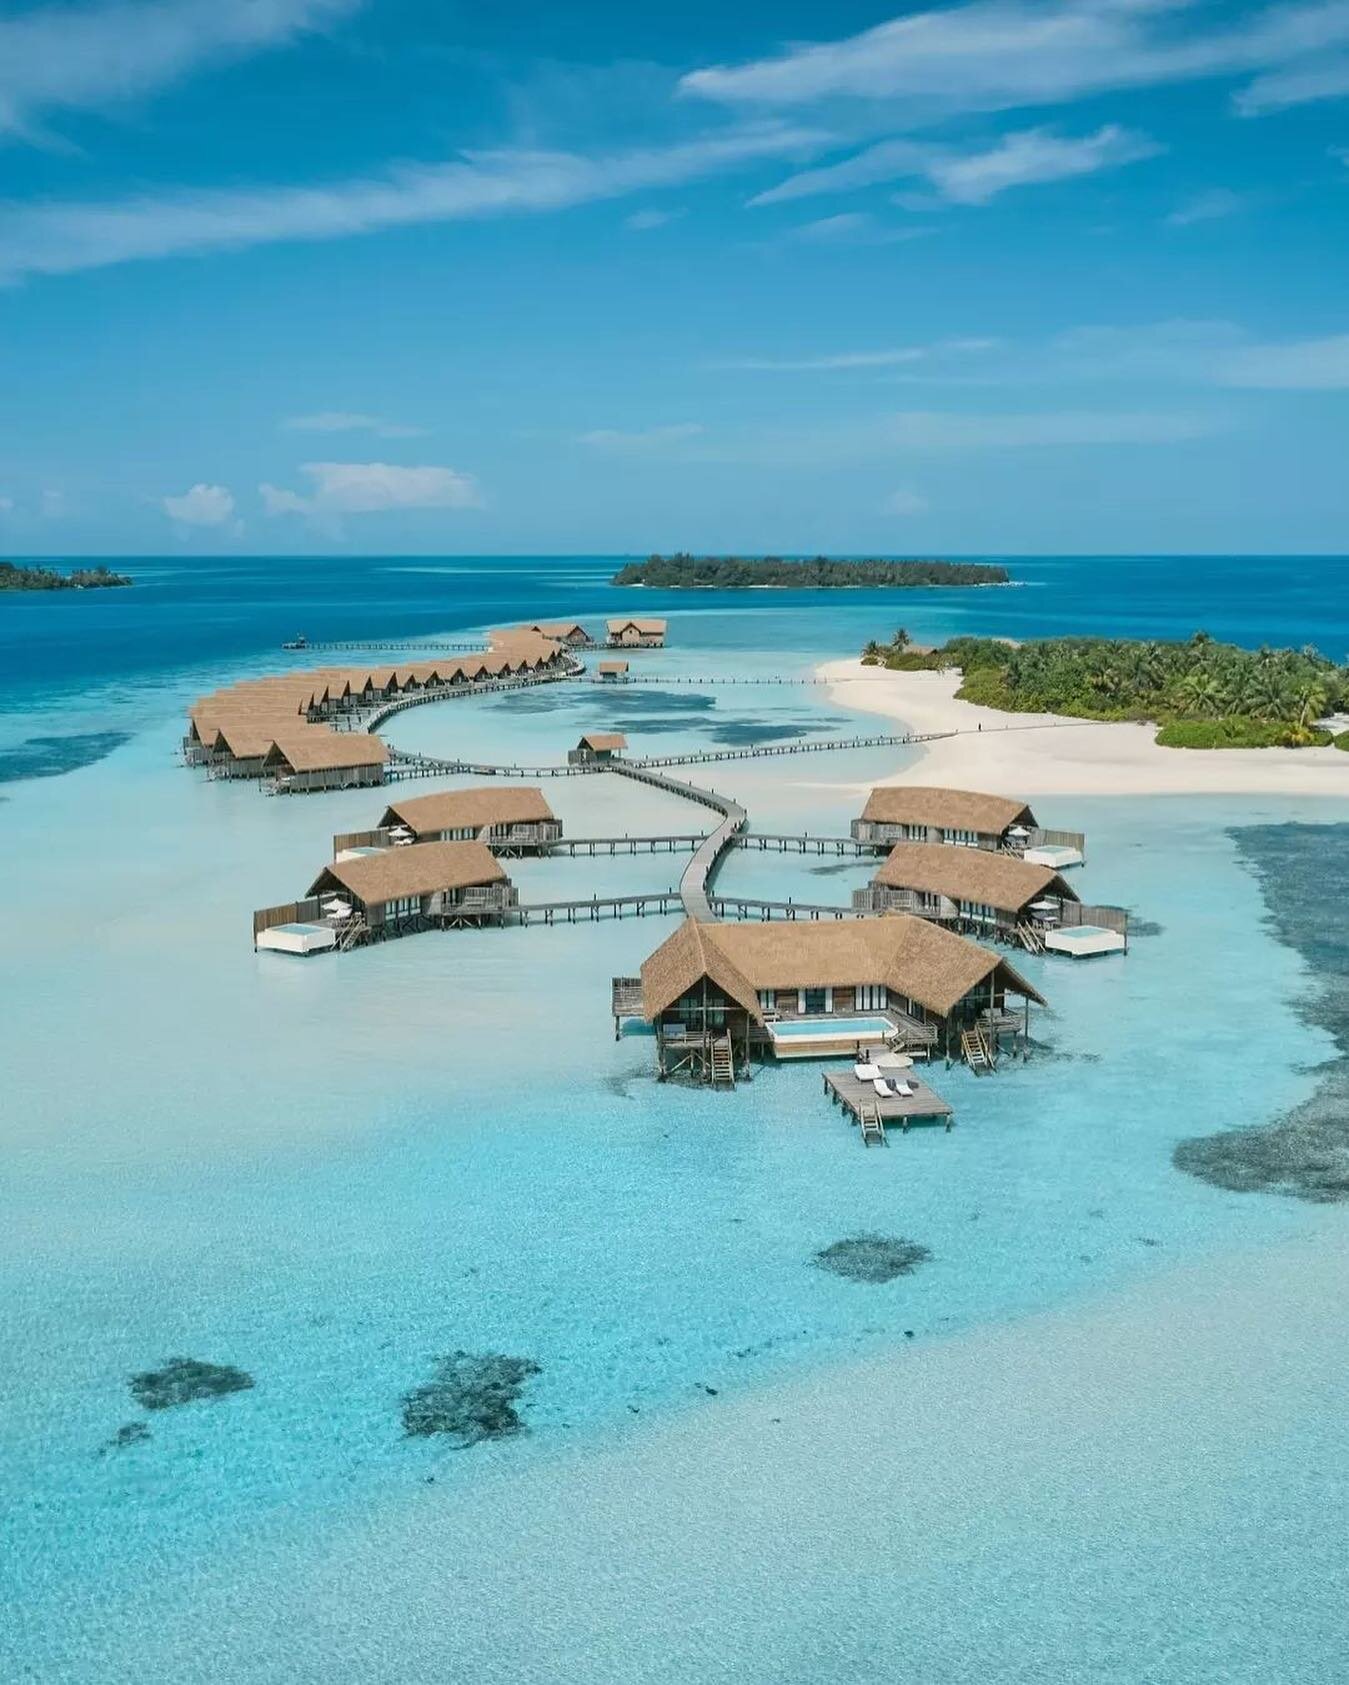 Barefoot, understated luxury, @comococoaisland is an intimate private island retreat, offering unique overwater suites all resembling a traditional Maldivian Dhoni (local boat) 🚤

With its white sandy beaches, crystal-clear turquoise lagoons, and vi